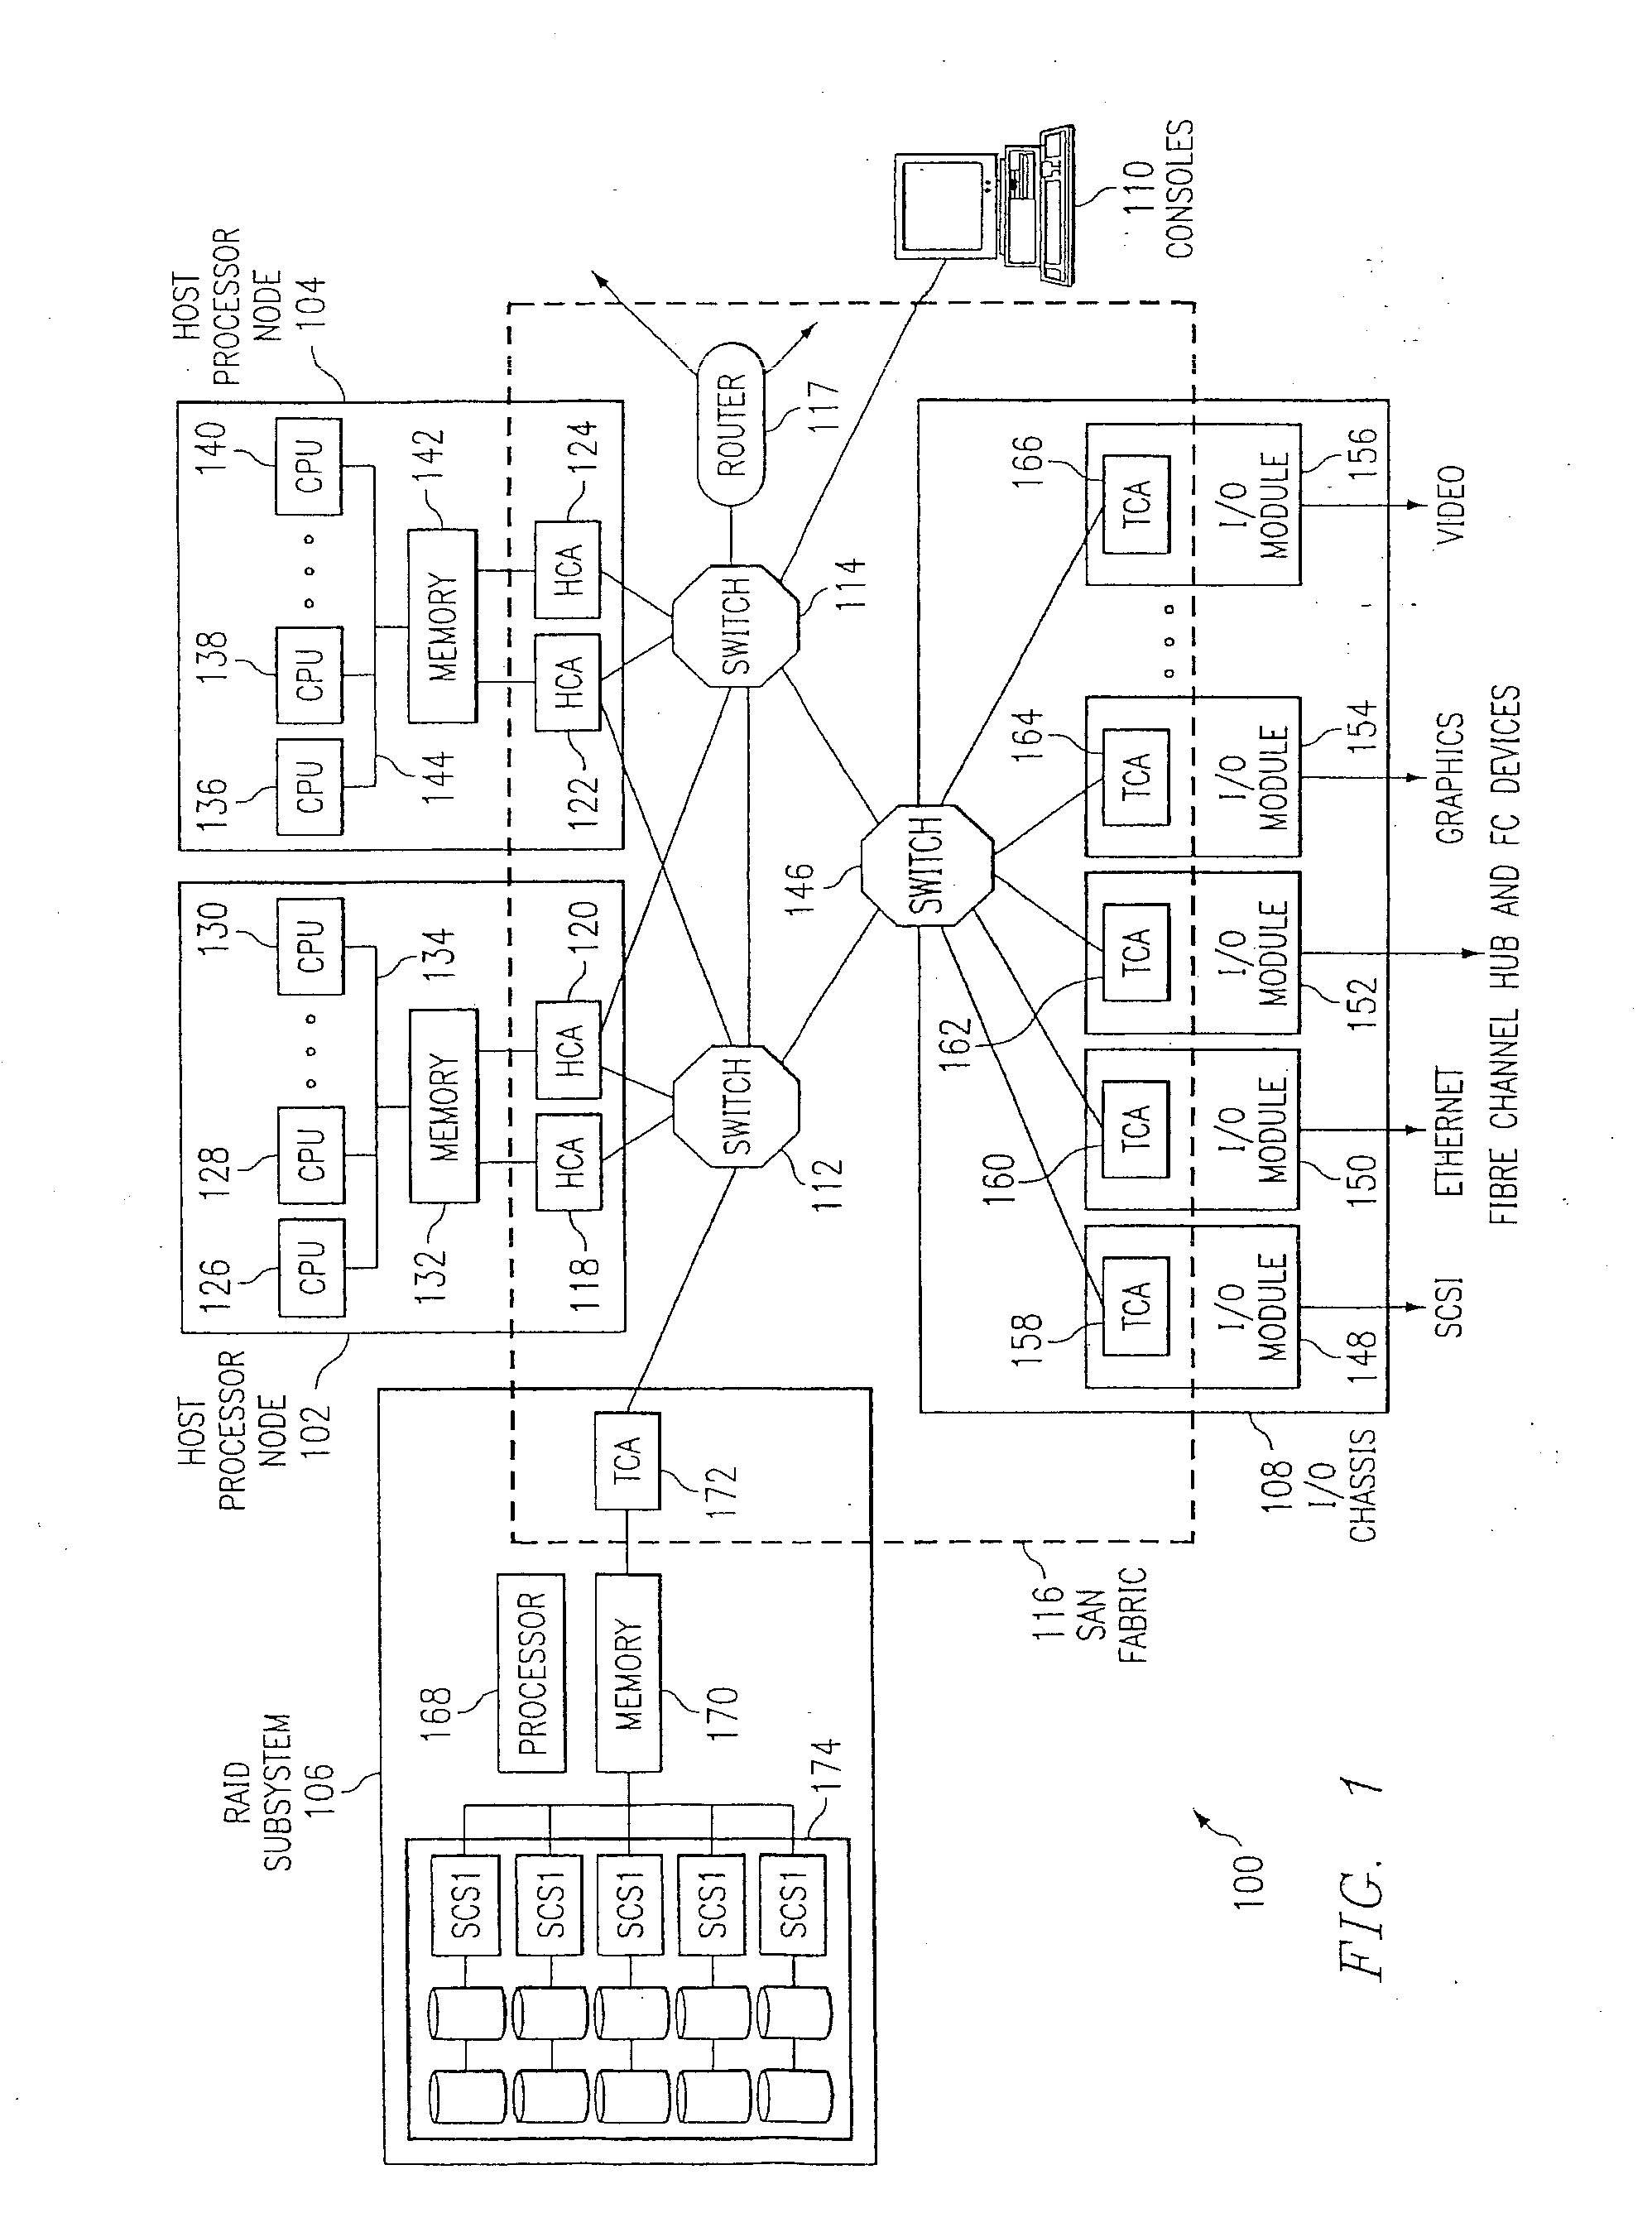 Method and System For Address Translation With Memory Windows